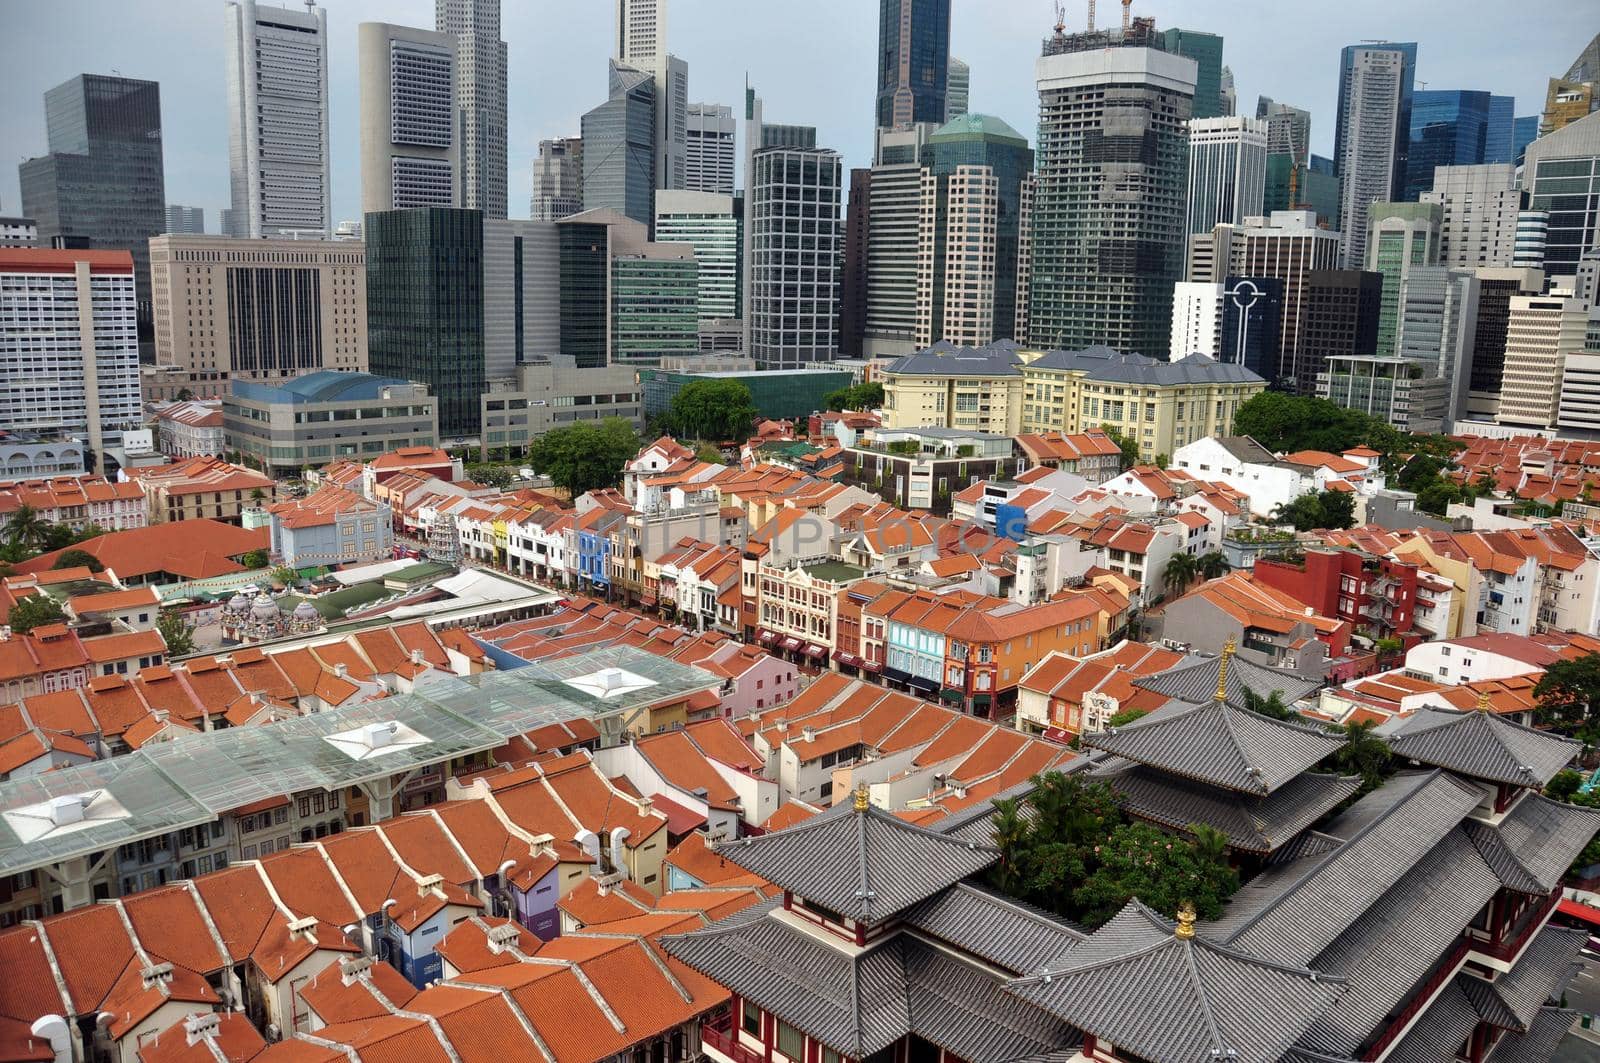 Chinatown in modern megapolis, View of orange rooftops of Chinatown with highrise buildings of modern futuristic city, Singapore